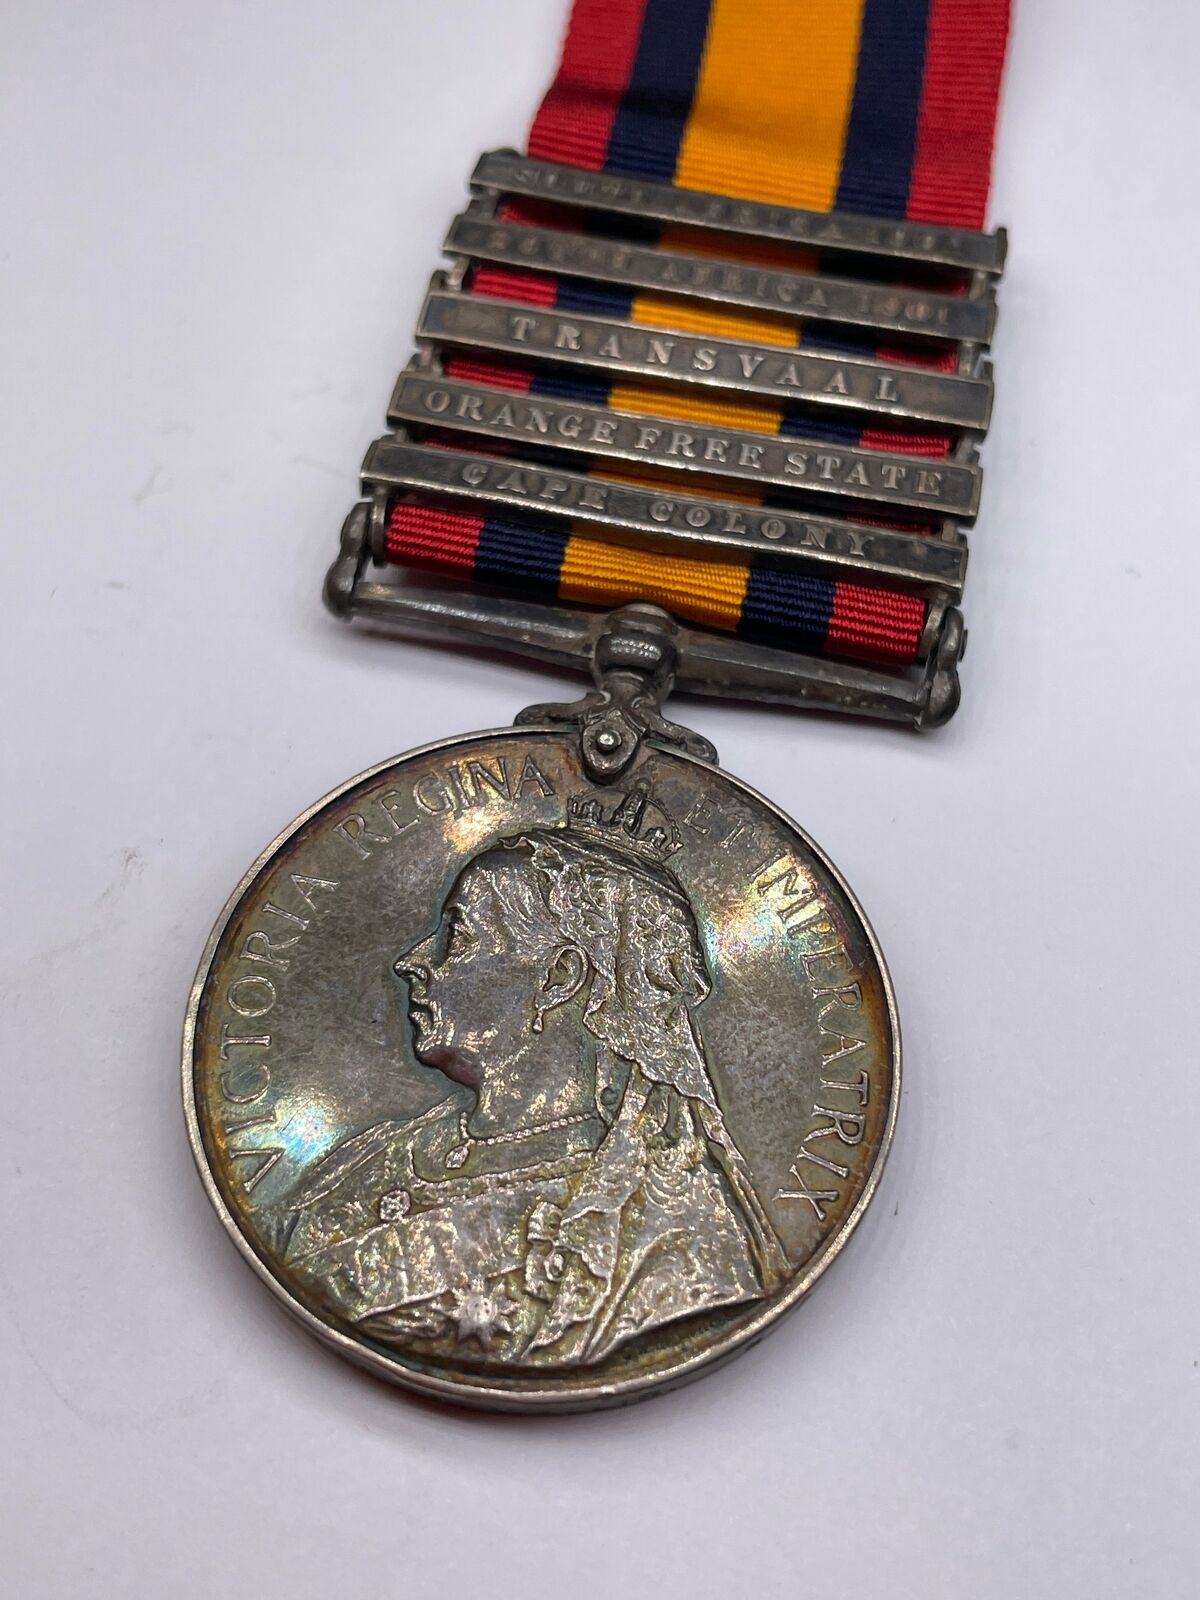 Original Queens South Africa Medal, Five Clasps, Wallis, South African Constab.